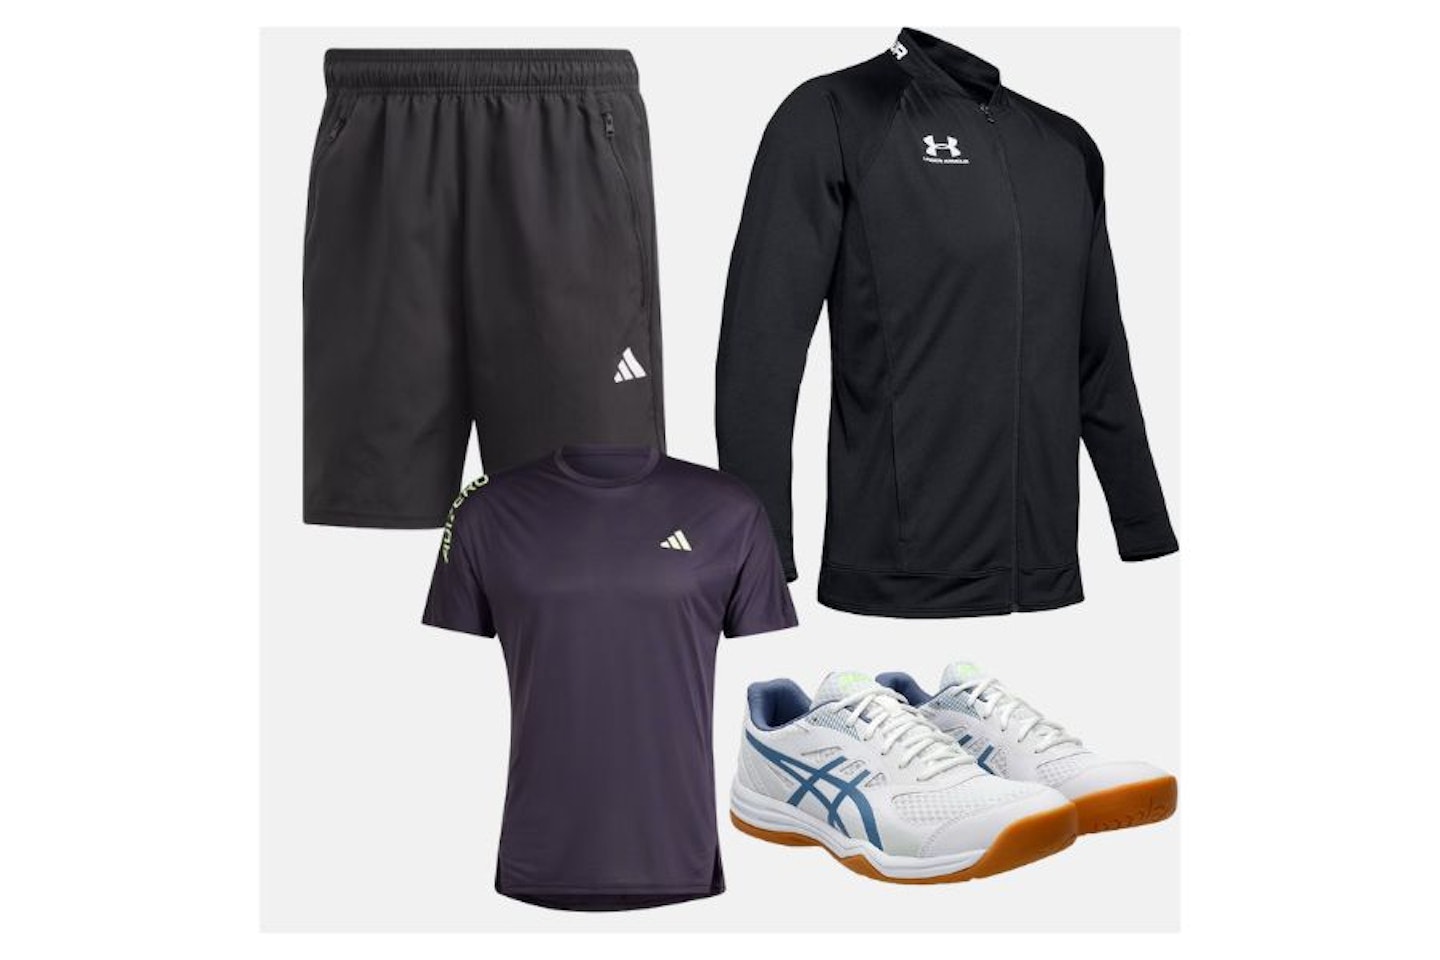 An example badminton outfit for men, including shorts, top, jacket and trainers